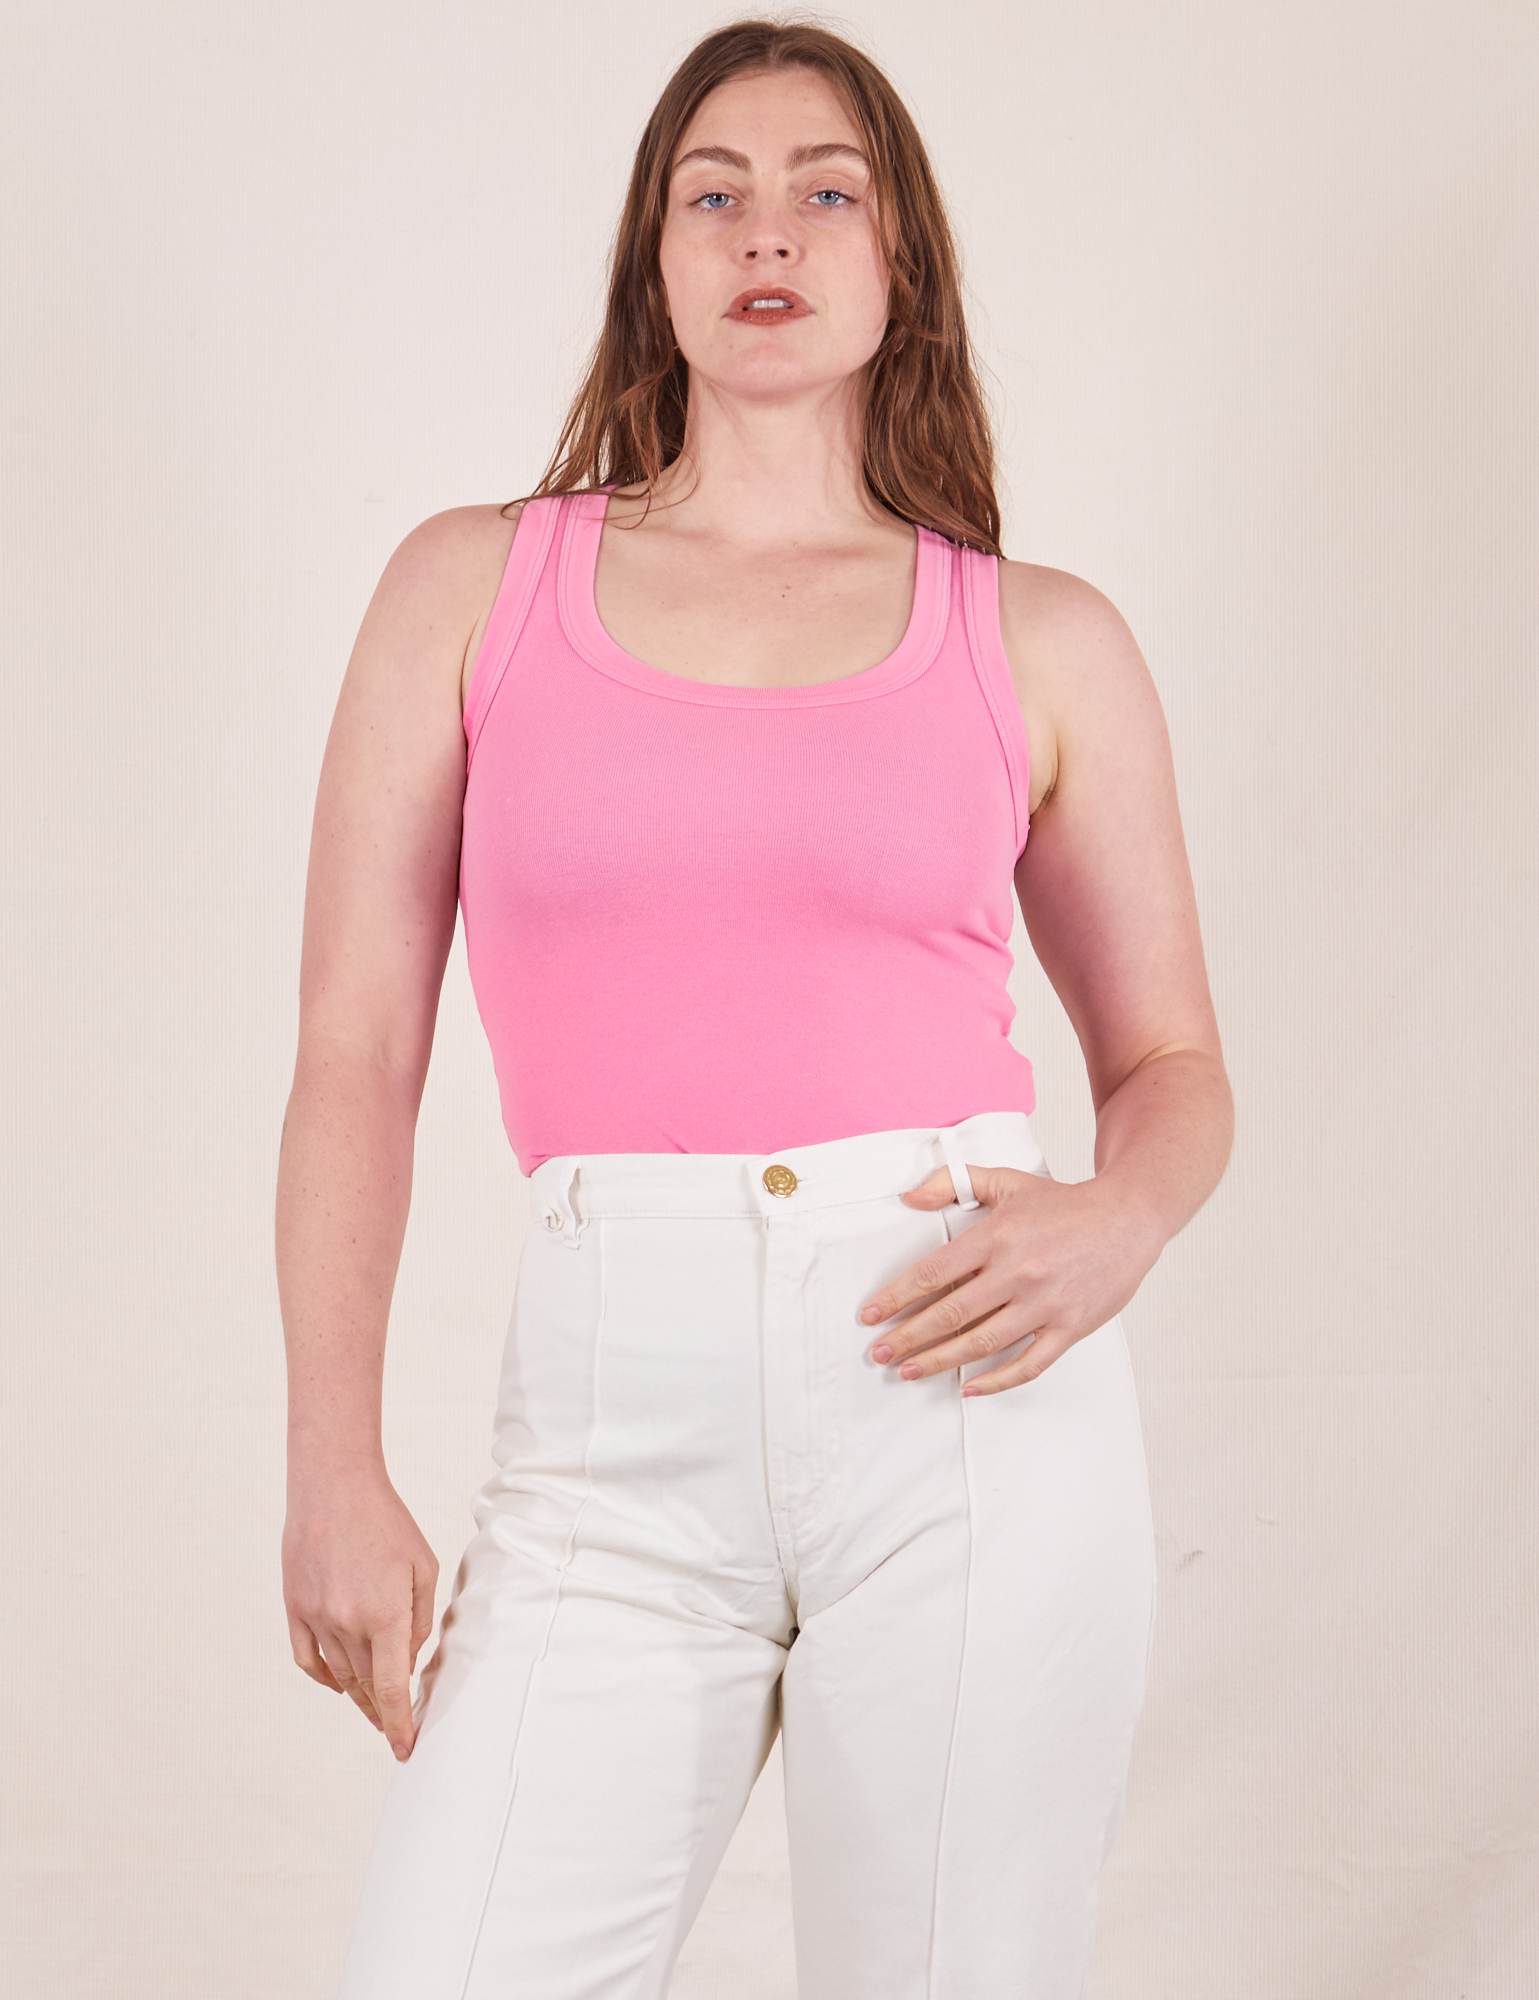 Allison is wearing size XXS Tank Top in Bubblegum Pink paired with vintage off-white Western Pants